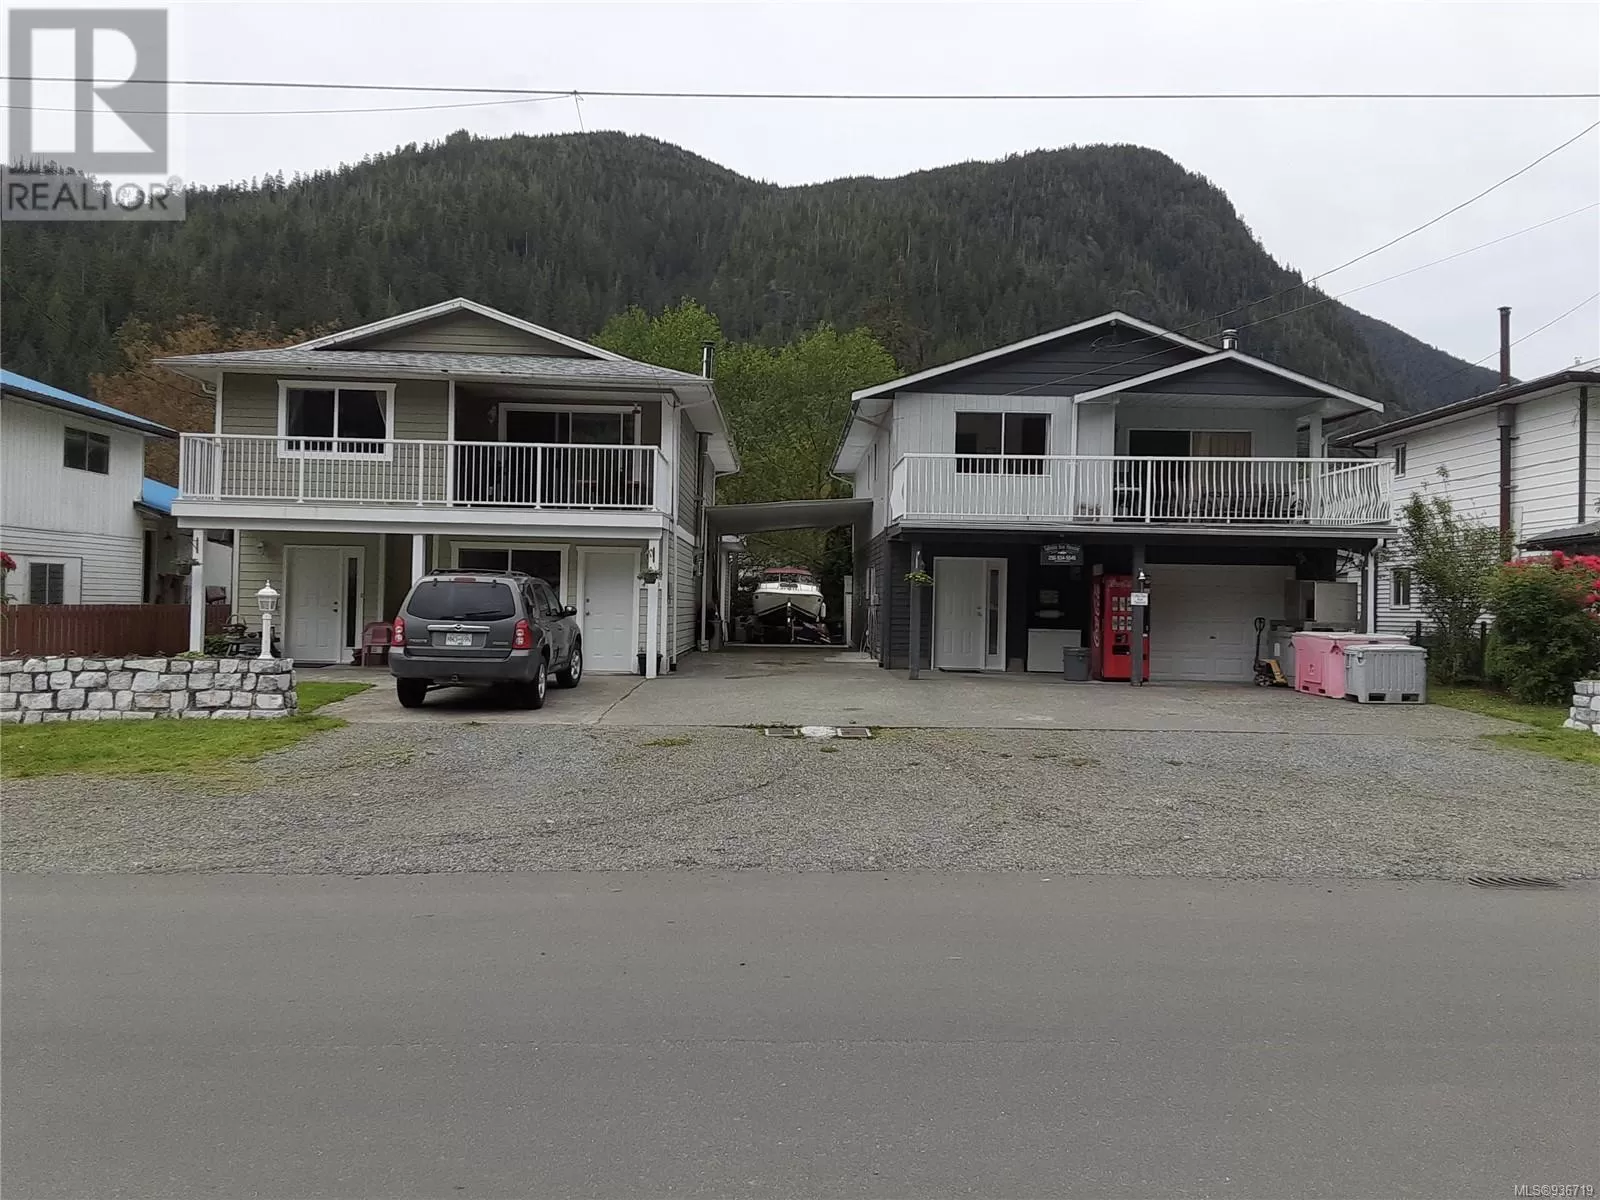 House for rent: 420/428 Alpine View Rd, Tahsis, British Columbia V0P 1X0